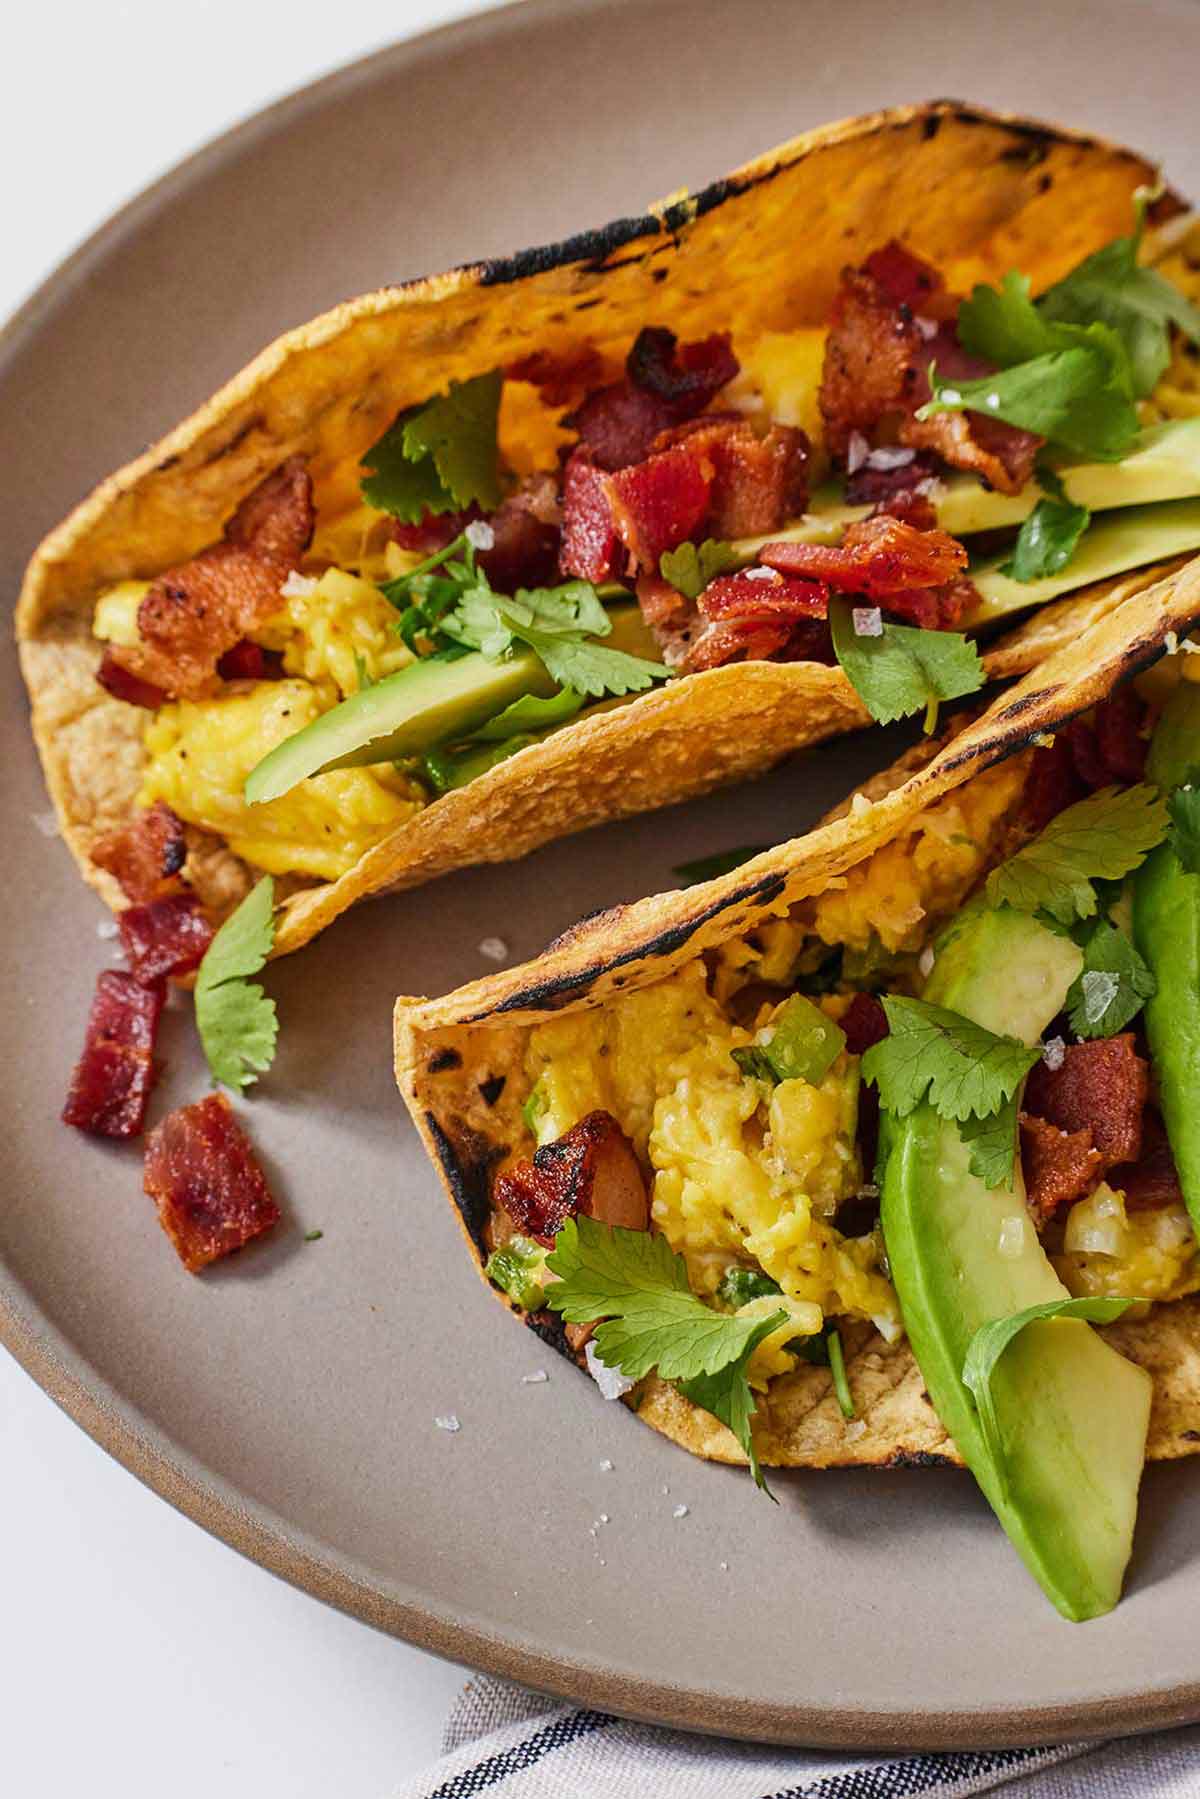 A plate with two breakfast tacos filled with eggs, bacon, and avocado.